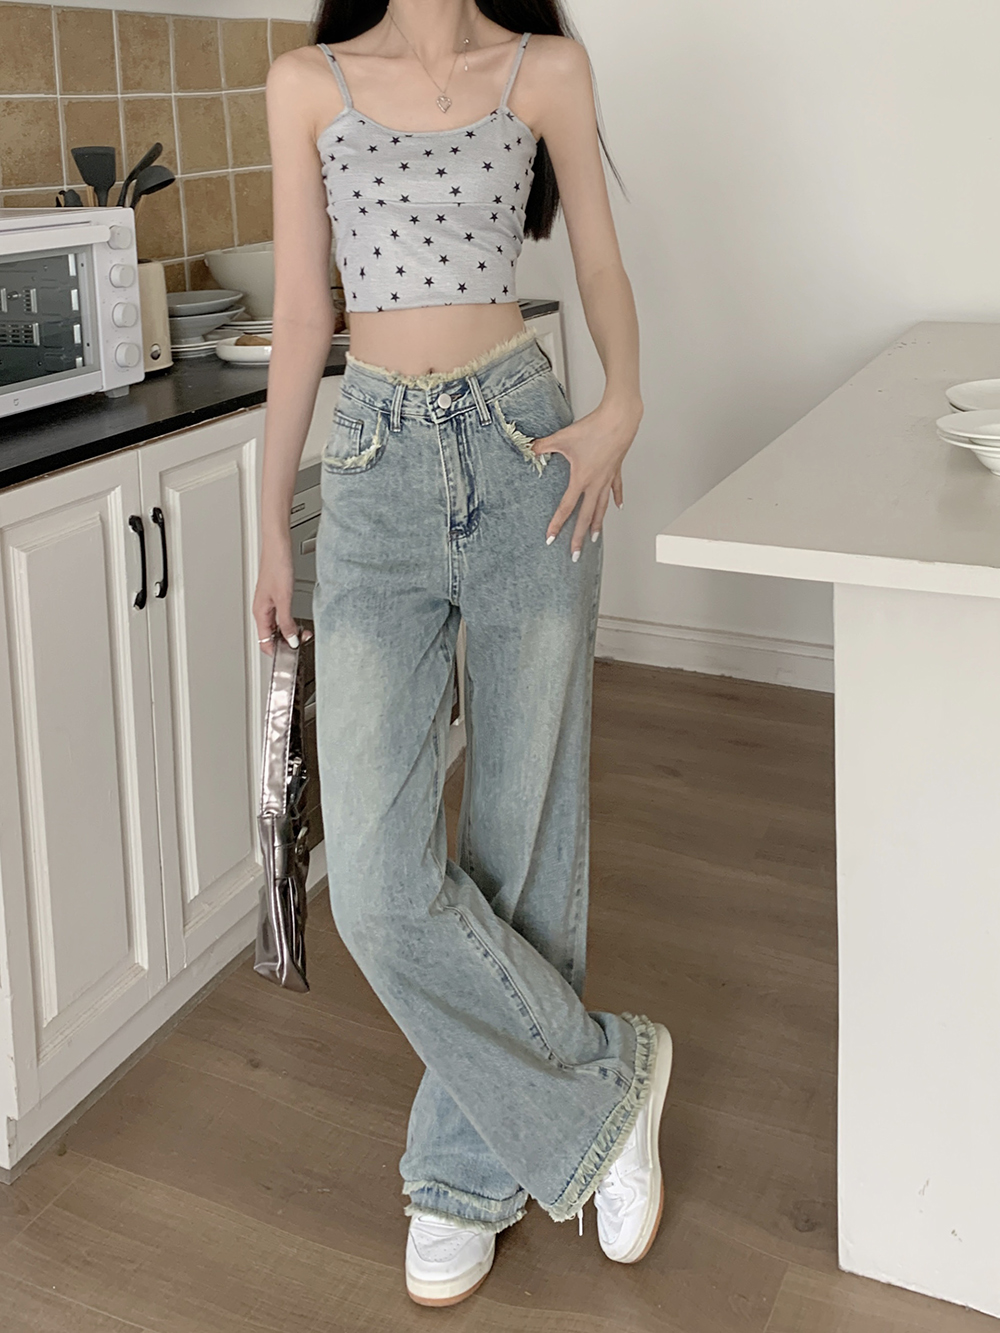 High waist burr pants loose mopping jeans for women